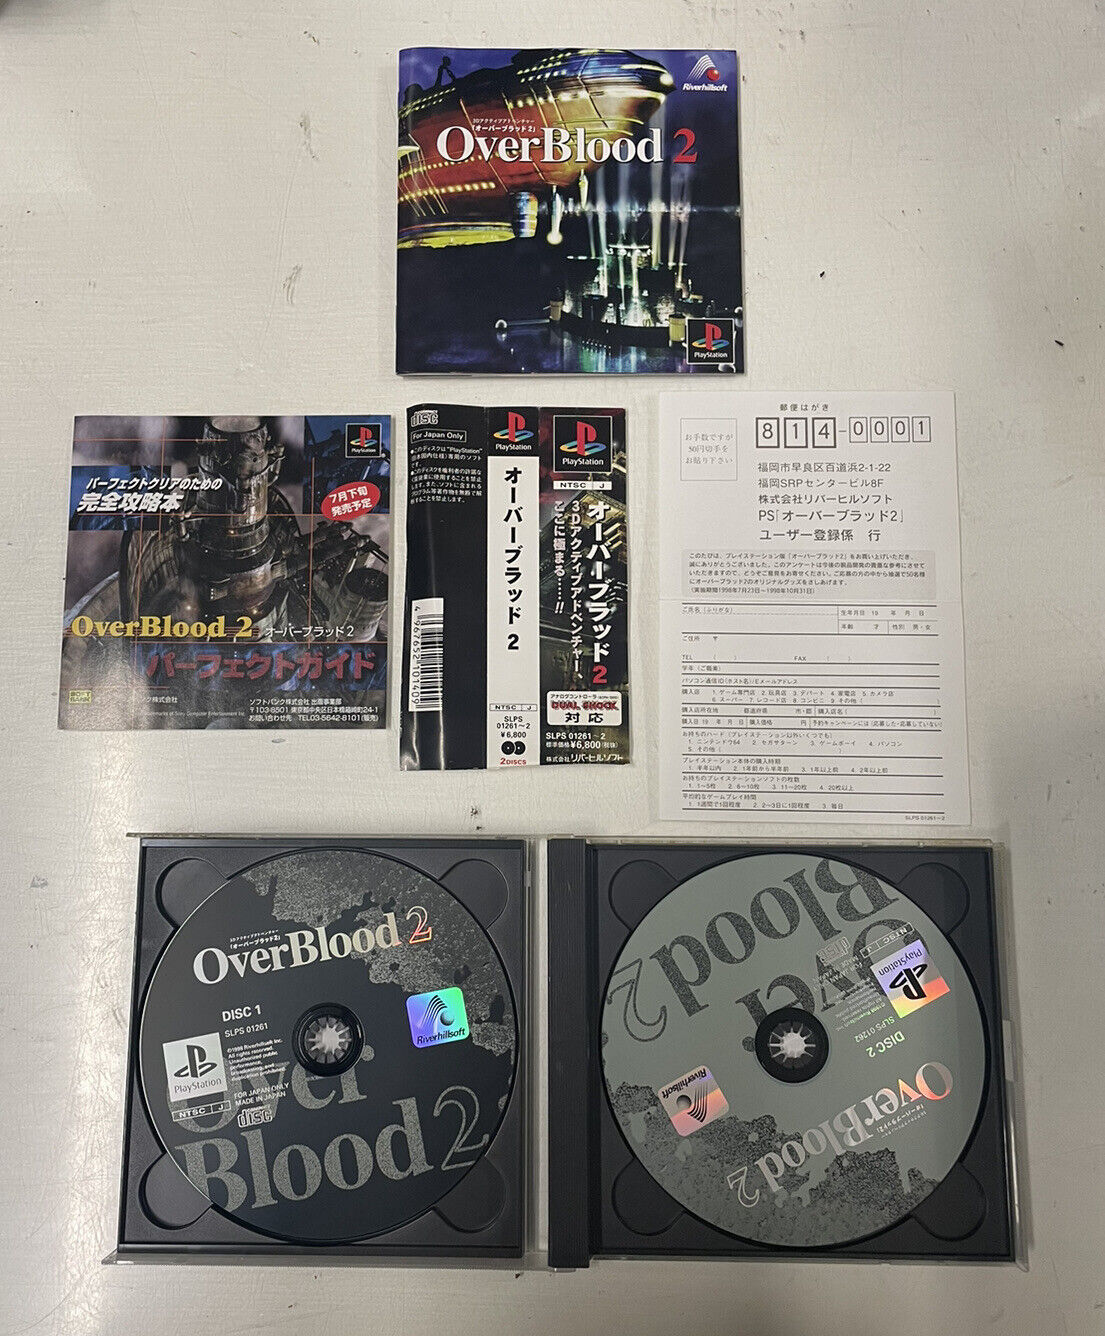 Ps1-OVERBLOOD-NTSC-jap-01261-Playstation-Sony-134387755282-3